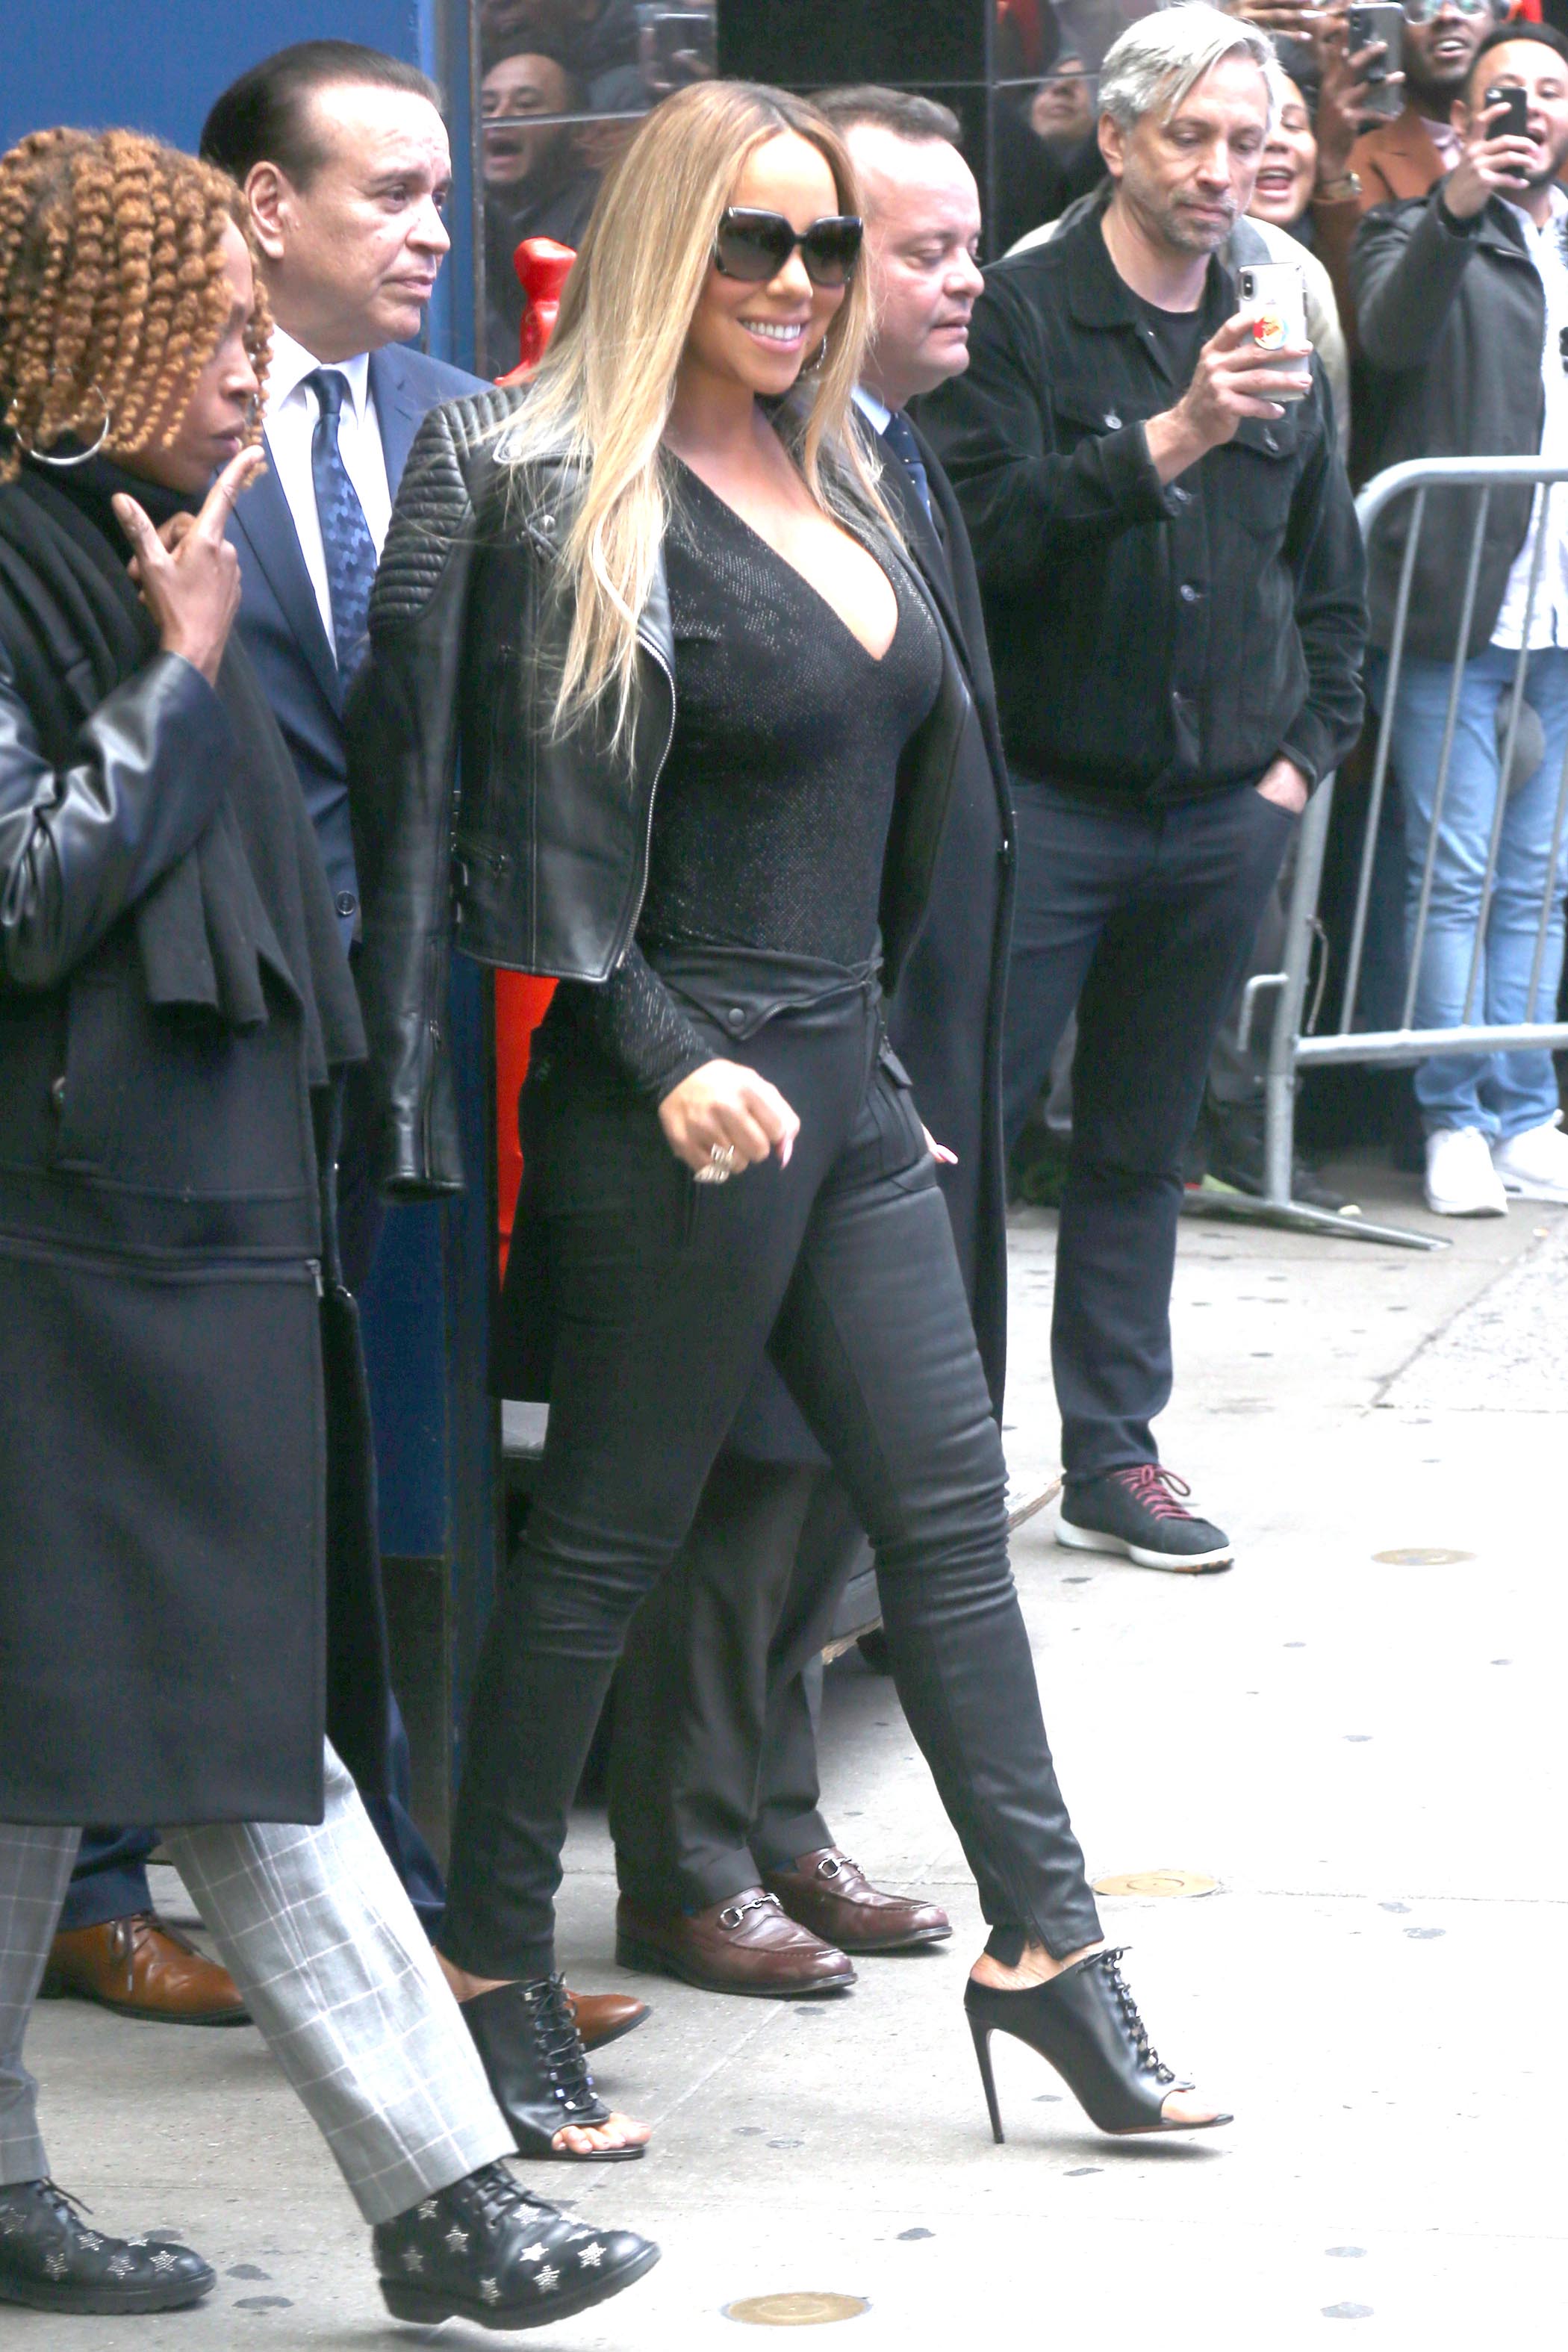 Mariah Carey leaves the Good Morning America show after promoting her new ablum